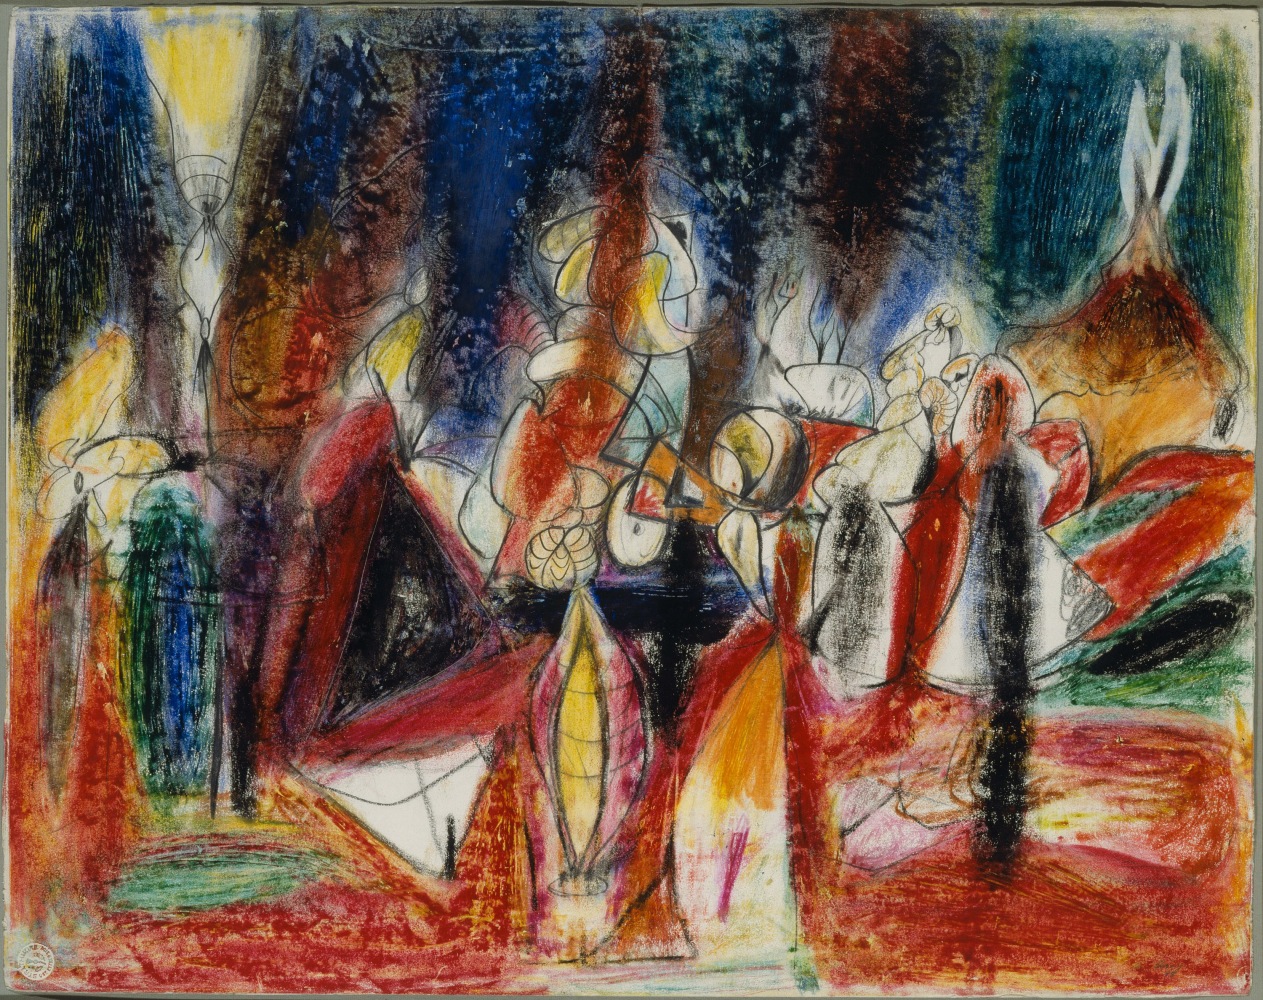 Carnival,&amp;nbsp;1943, crayon and graphite pencil on paper,&amp;nbsp;22 3/4 x 28 13/16 in. (57.8 x 73.2 cm).&amp;nbsp;Art Institute of Chicago.&amp;nbsp;Gift of Lindy Bergman (The Lindy and Edwin Bergman Collection) (1999.937). [AGCR: D1010]